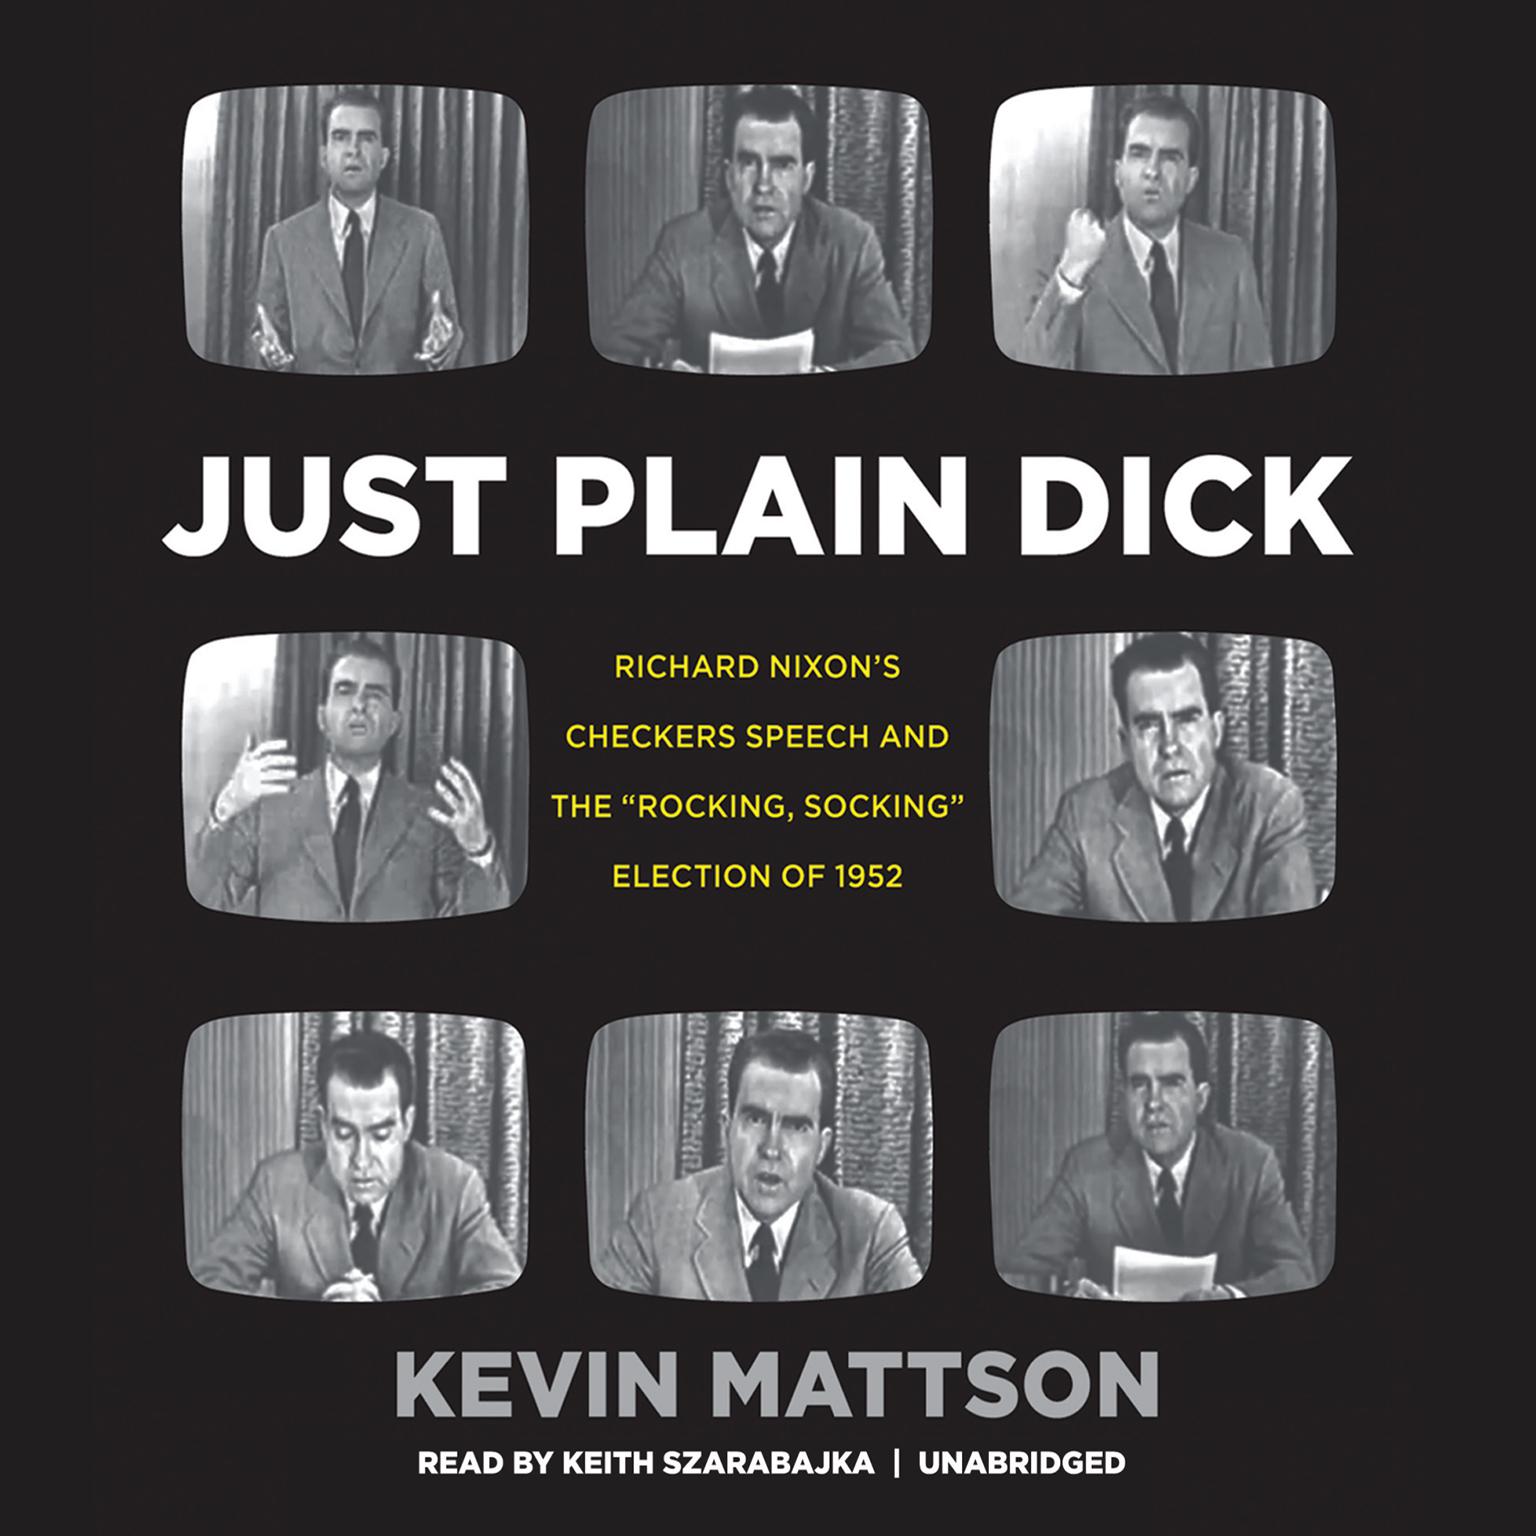 Just Plain Dick: Richard Nixon’s Checkers Speech and the “Rocking, Socking” Election of 1952 Audiobook, by Kevin Mattson